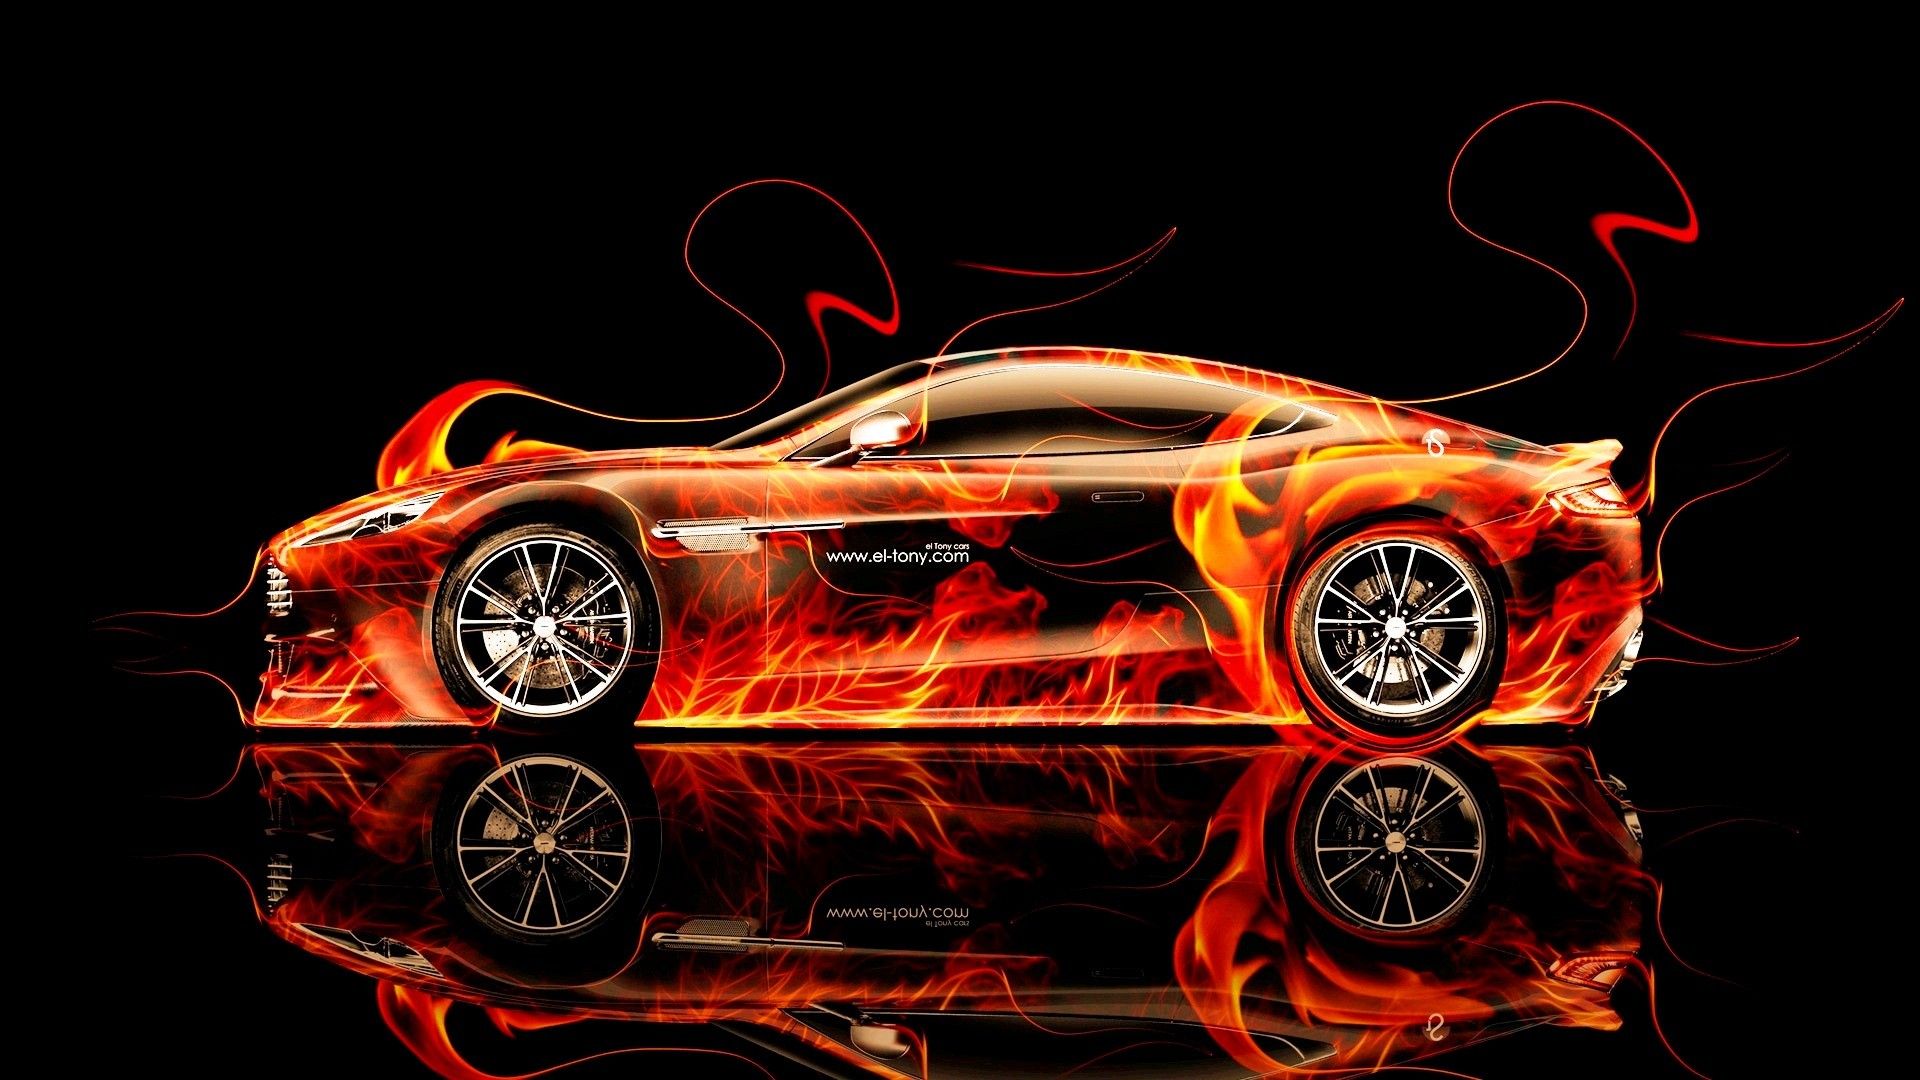 Design Talent Showcase Tony.com Brings Sensual Elements Fire And Water To YOUR Car Wallpaper 1